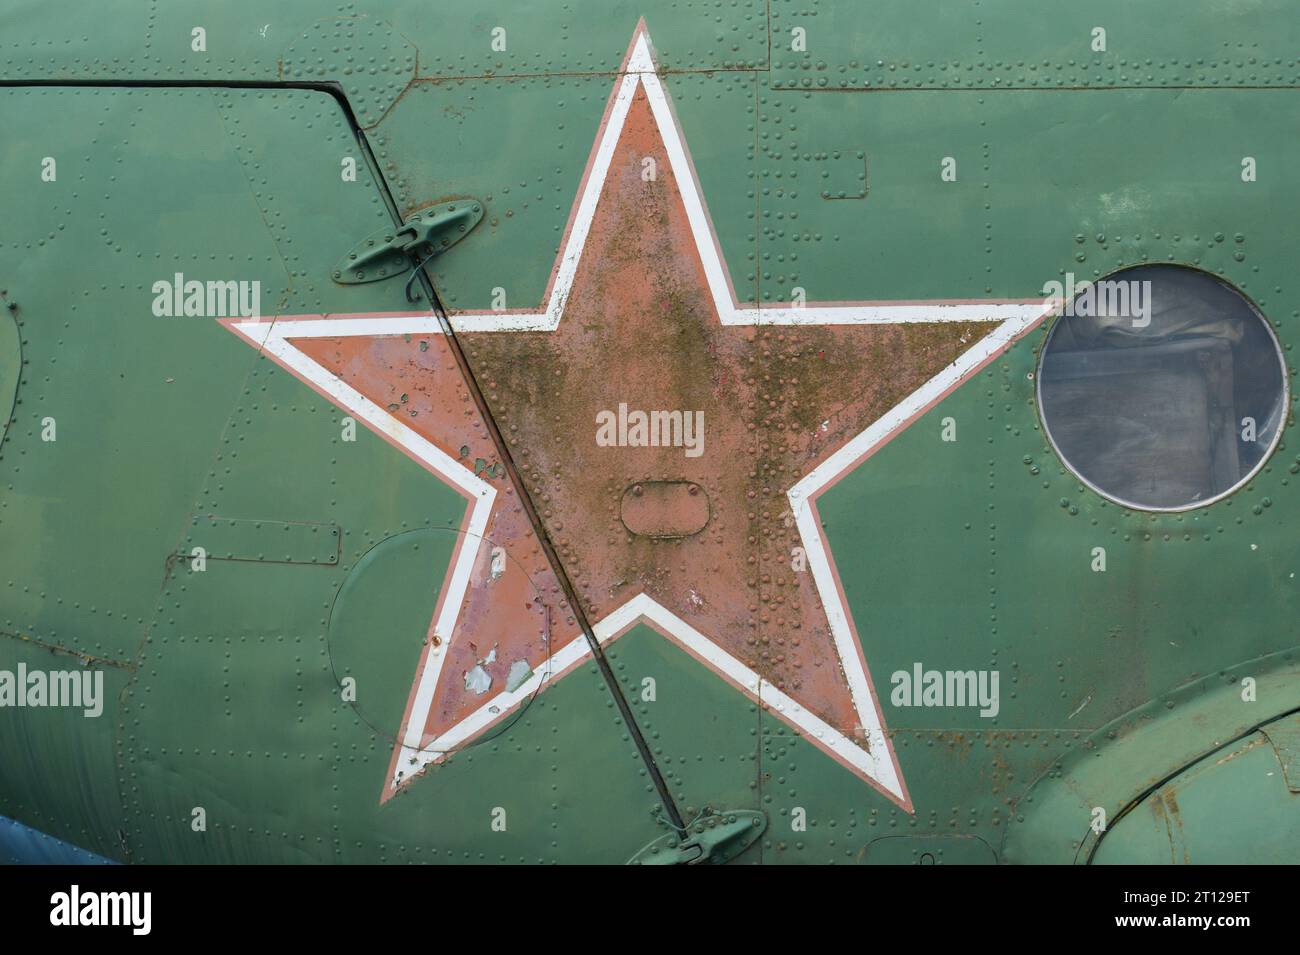 The symbol of the Soviet Union, the star on the fuselage of the helicopter. Aviation. Stock Photo